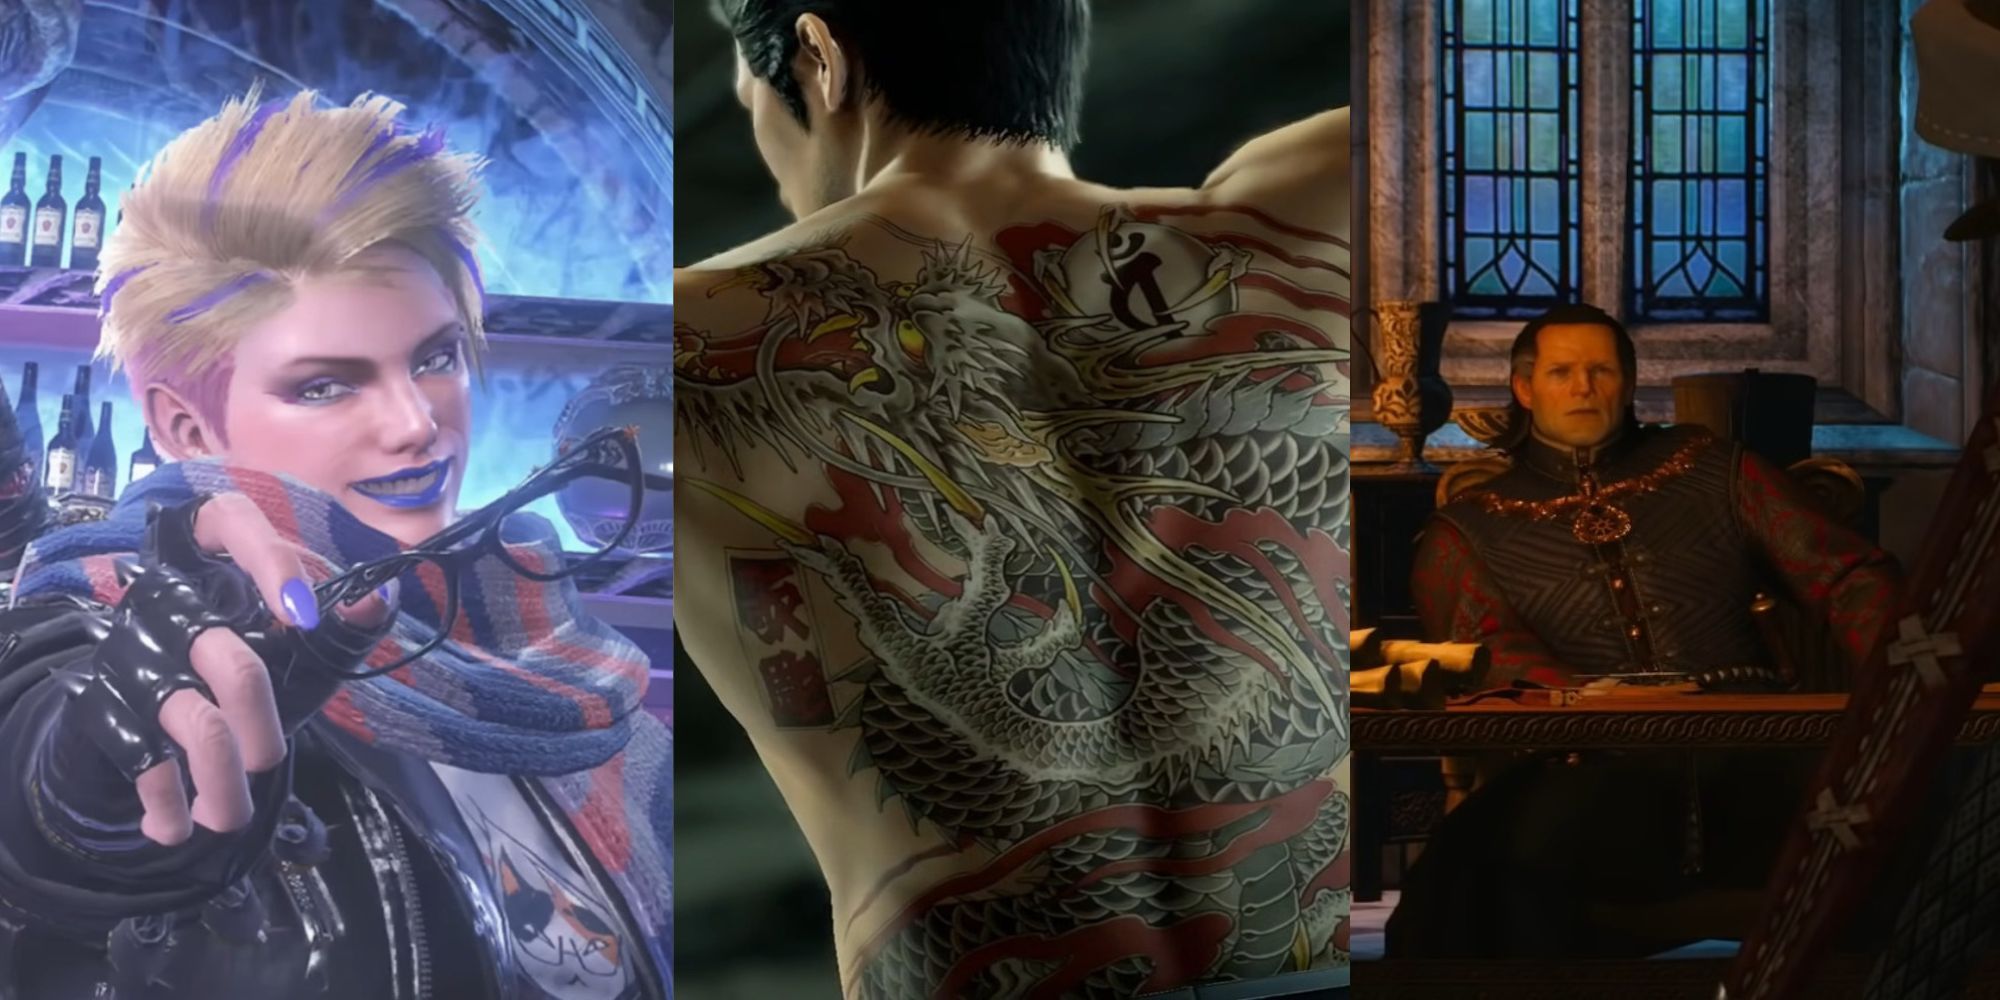 Viola from Bayonetta 3, Kiryu from Yakuza: Like A Dragon, and Emhyr from The Witcher